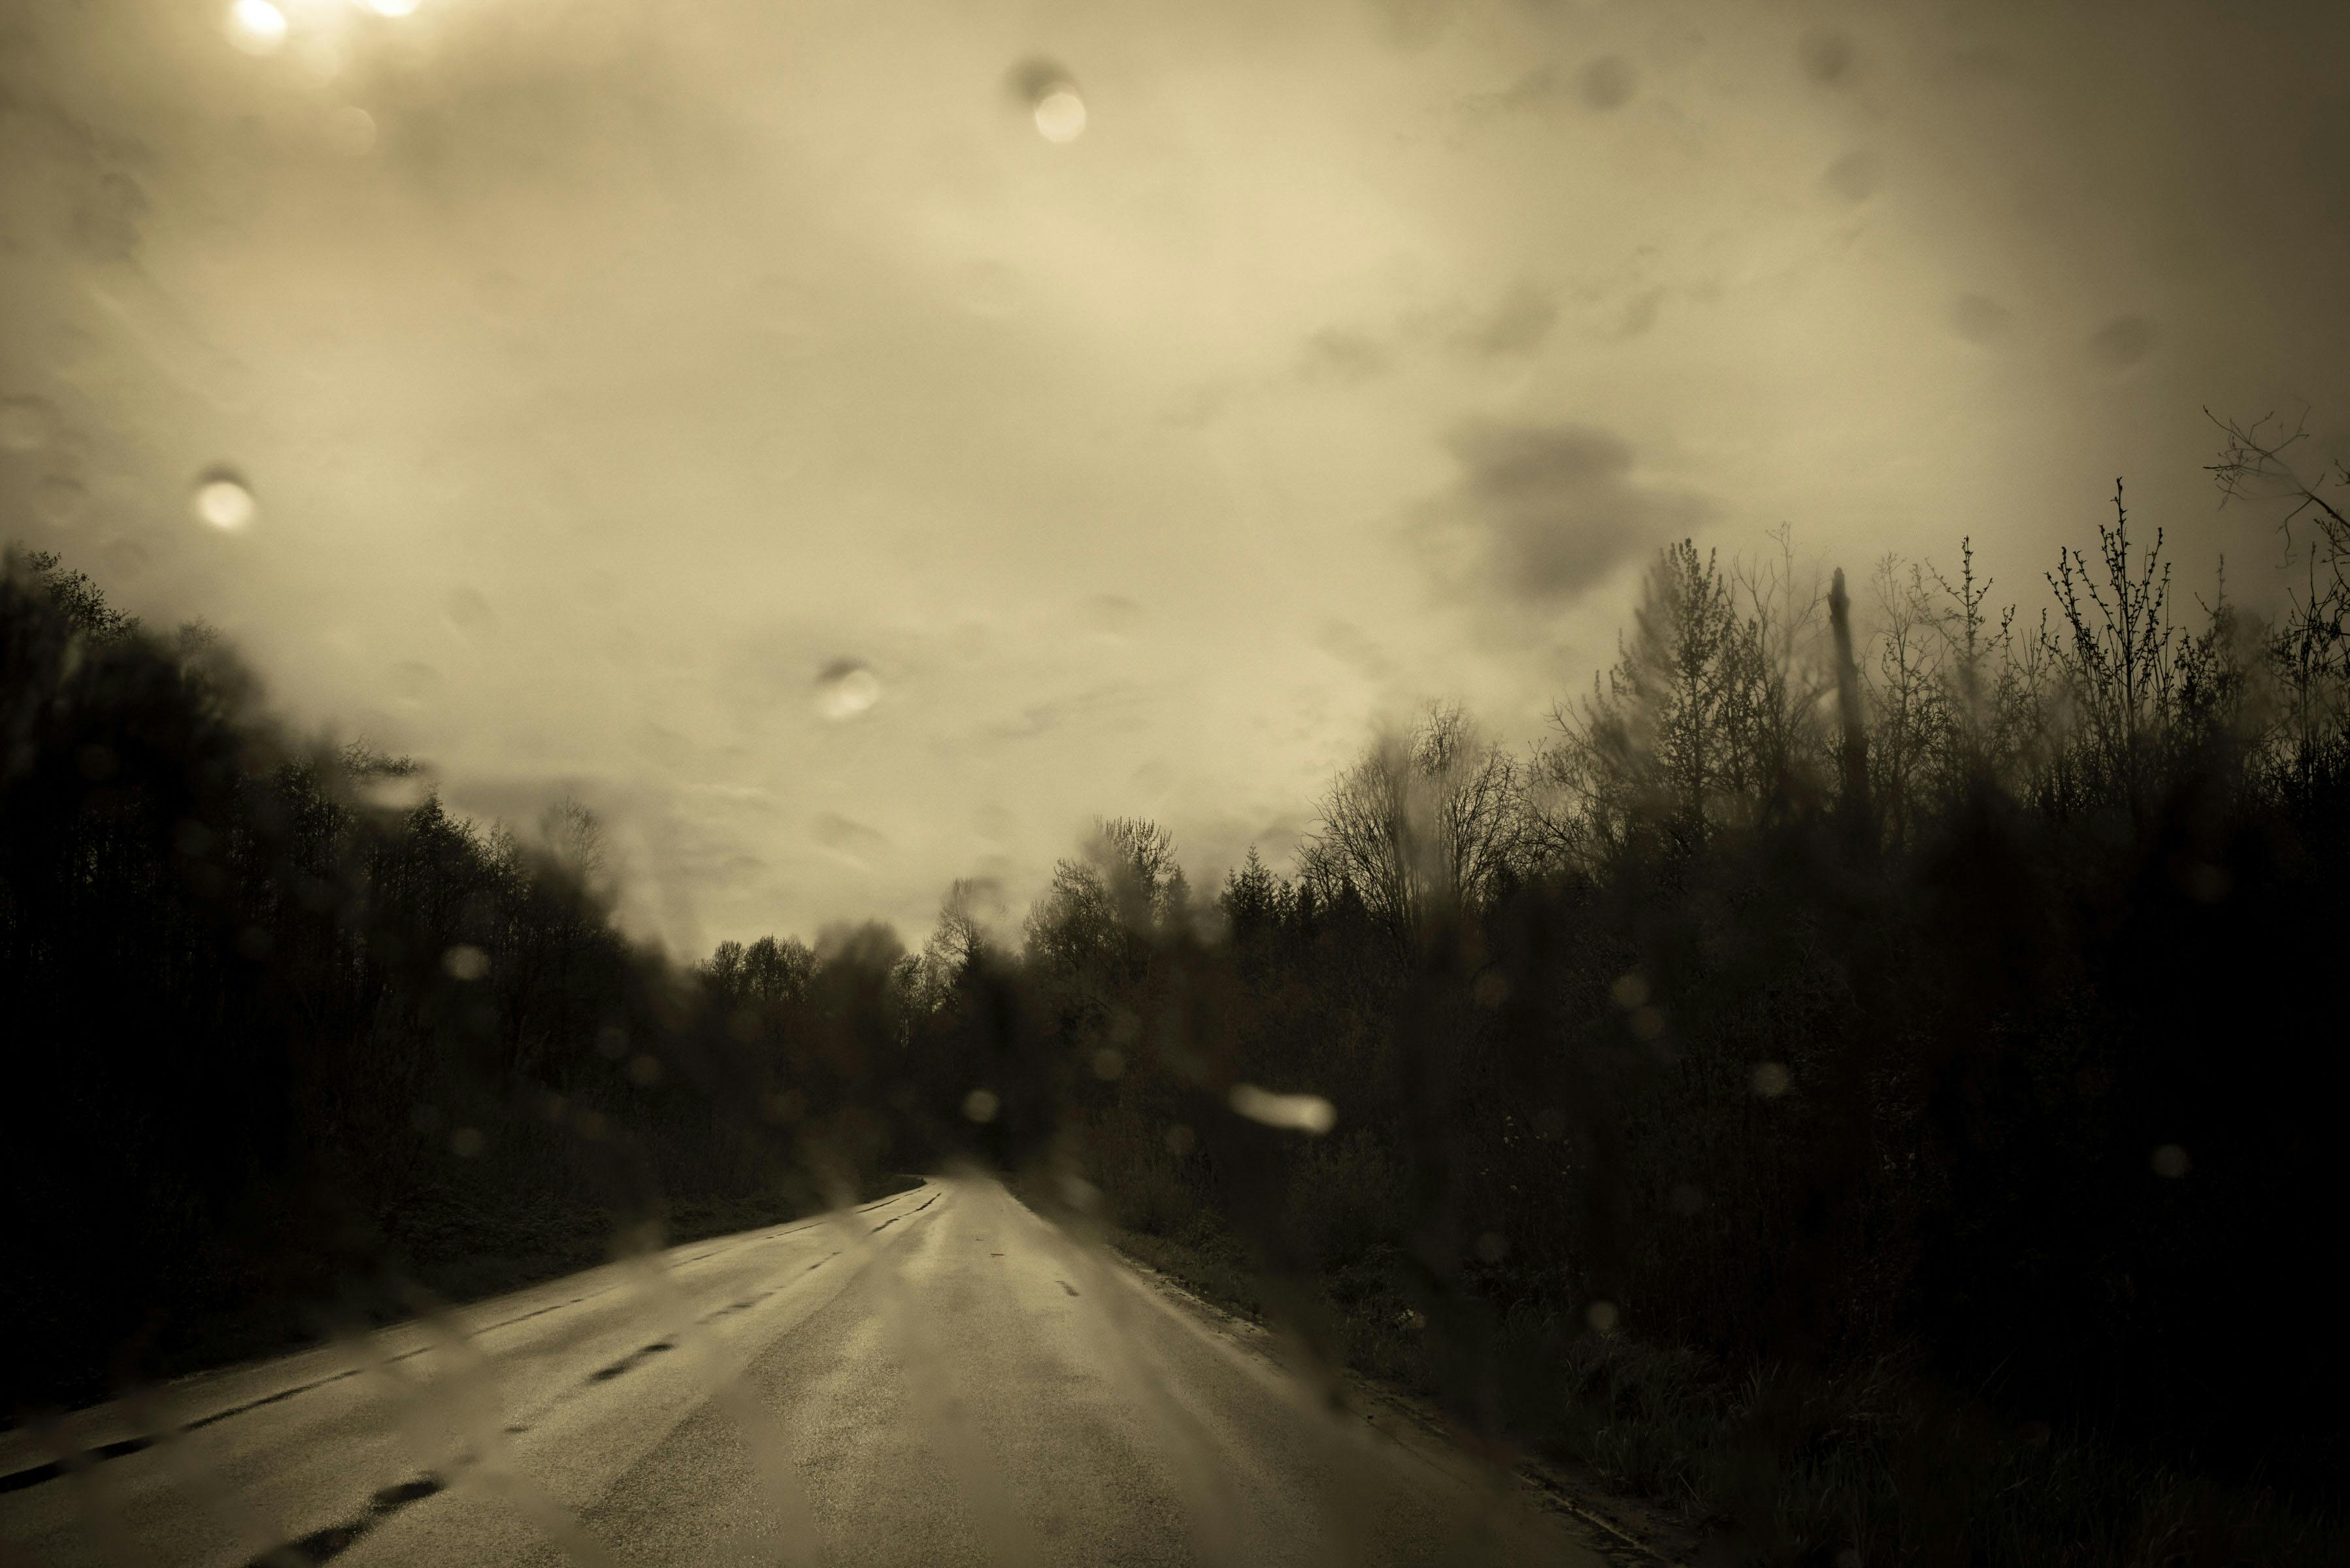 The Black Mechanism #14 by Todd Hido, Obscura Curated Commission.